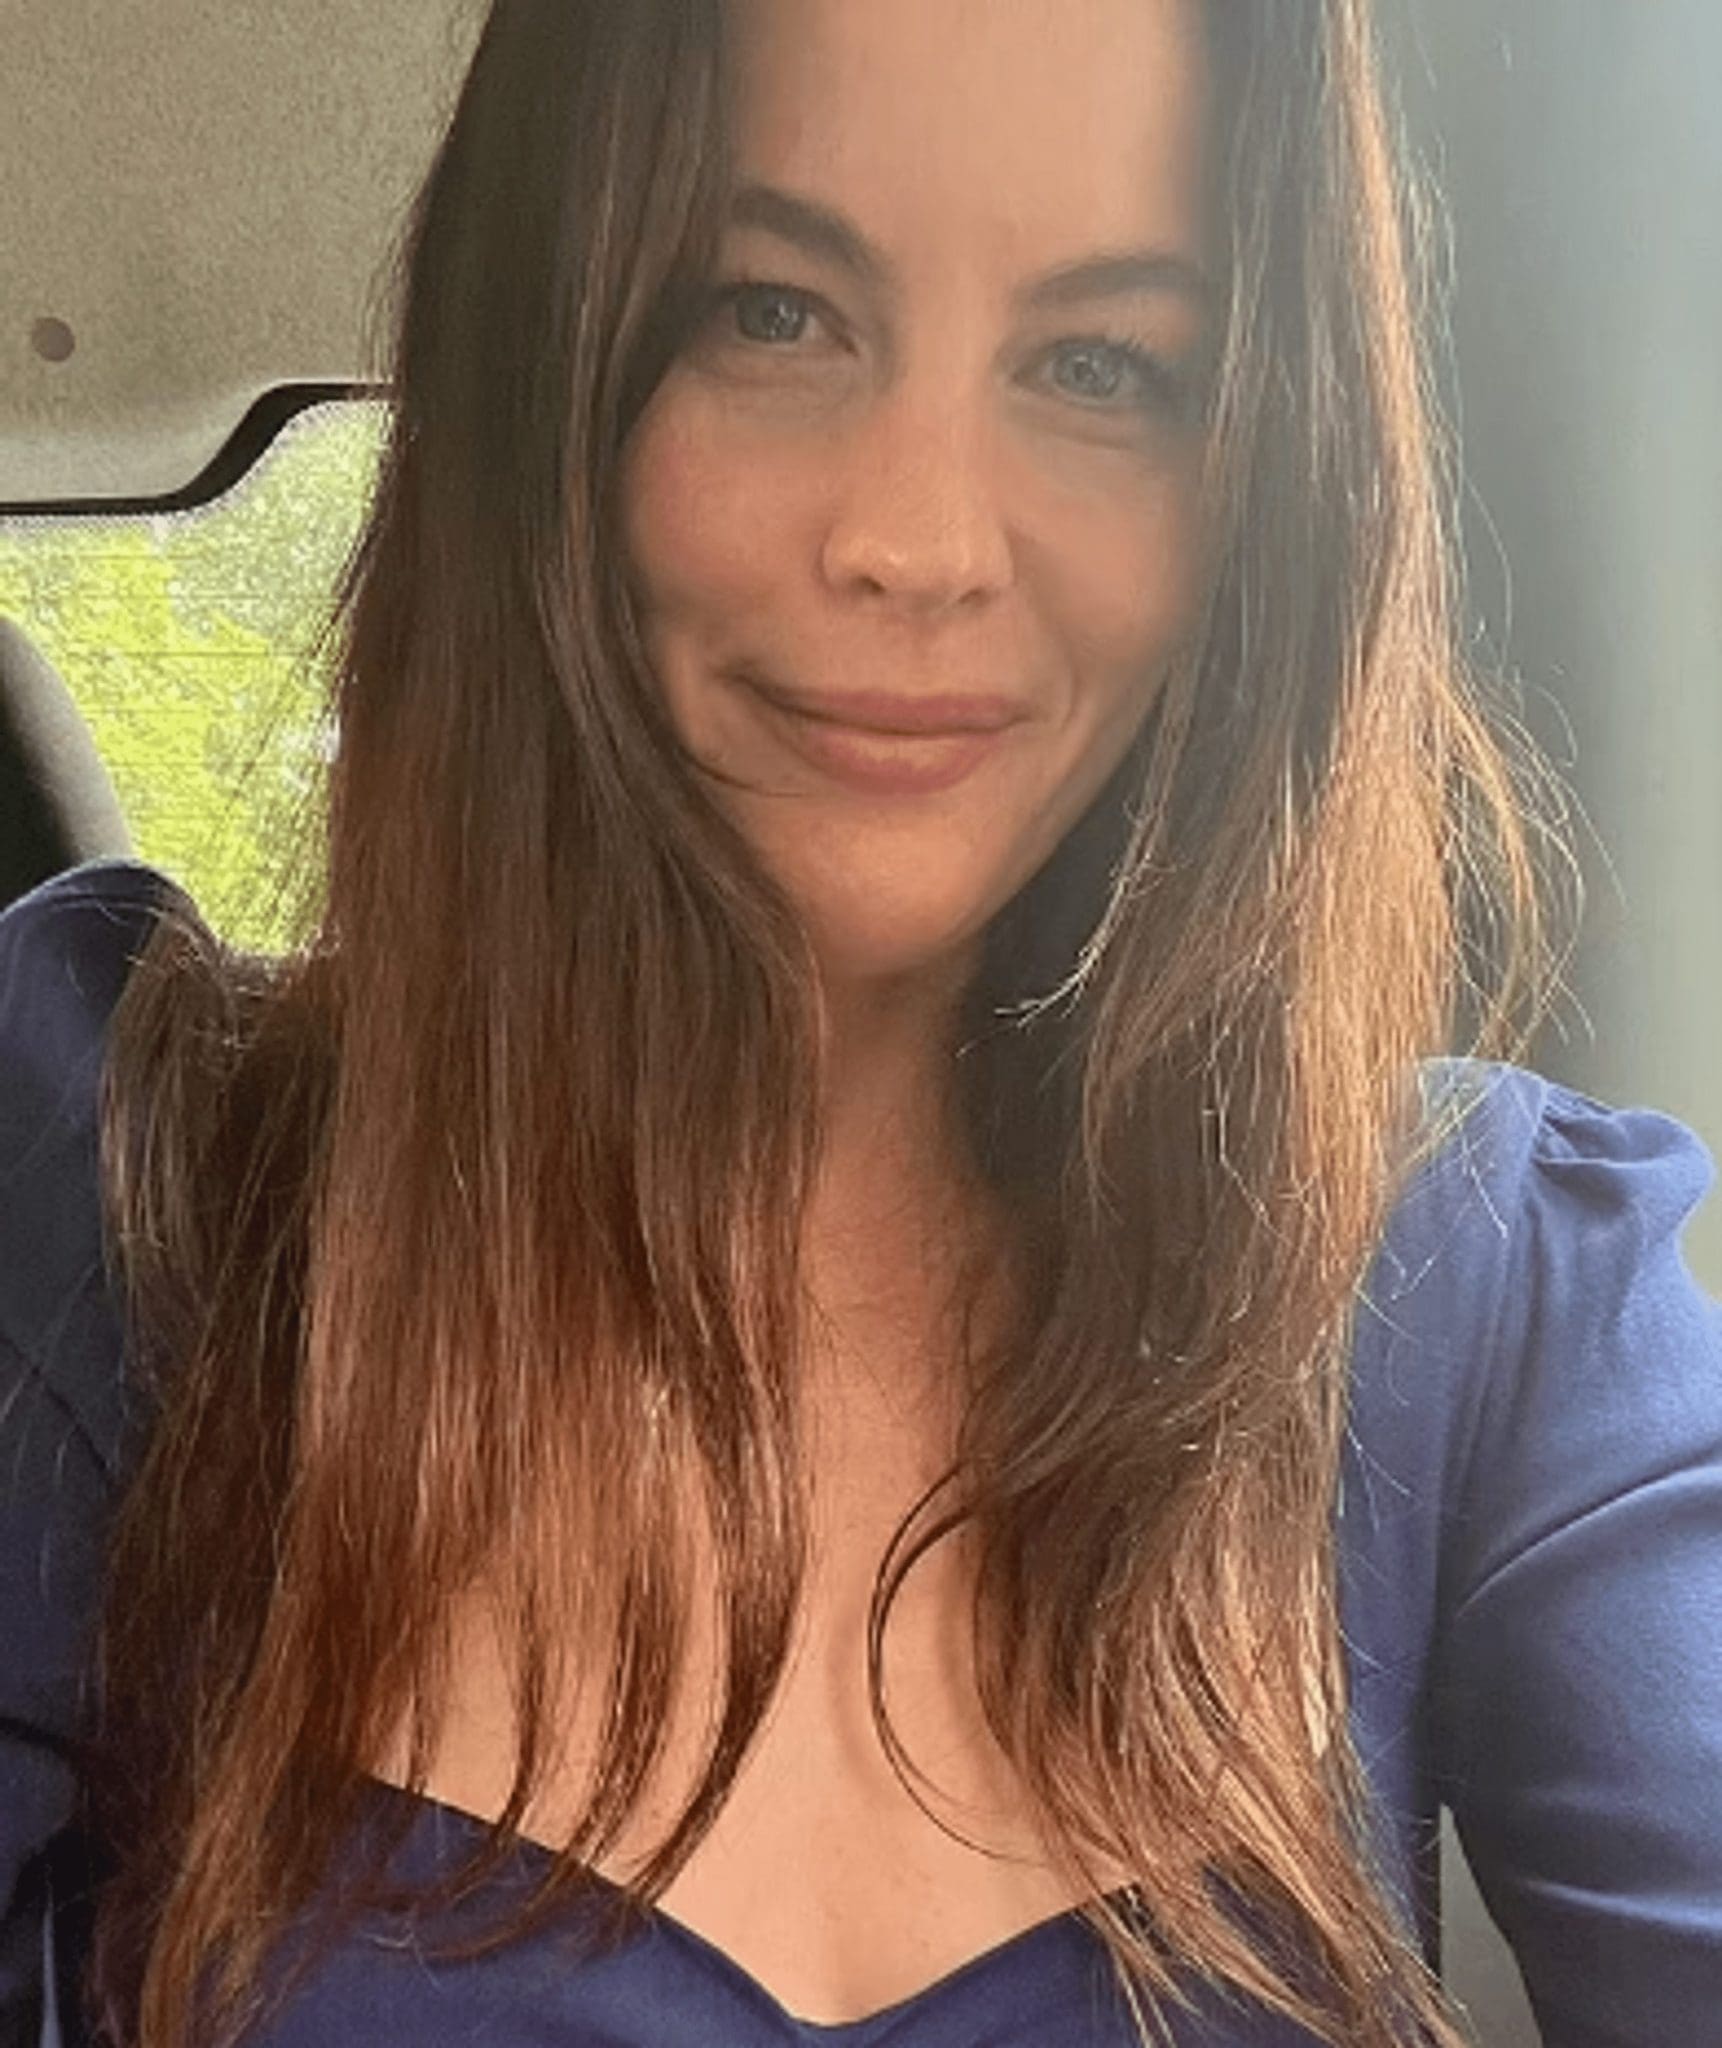 Due To Her Drastic Weight Loss, Liv Tyler Is No Longer Afraid To Wear Gowns With High Slits